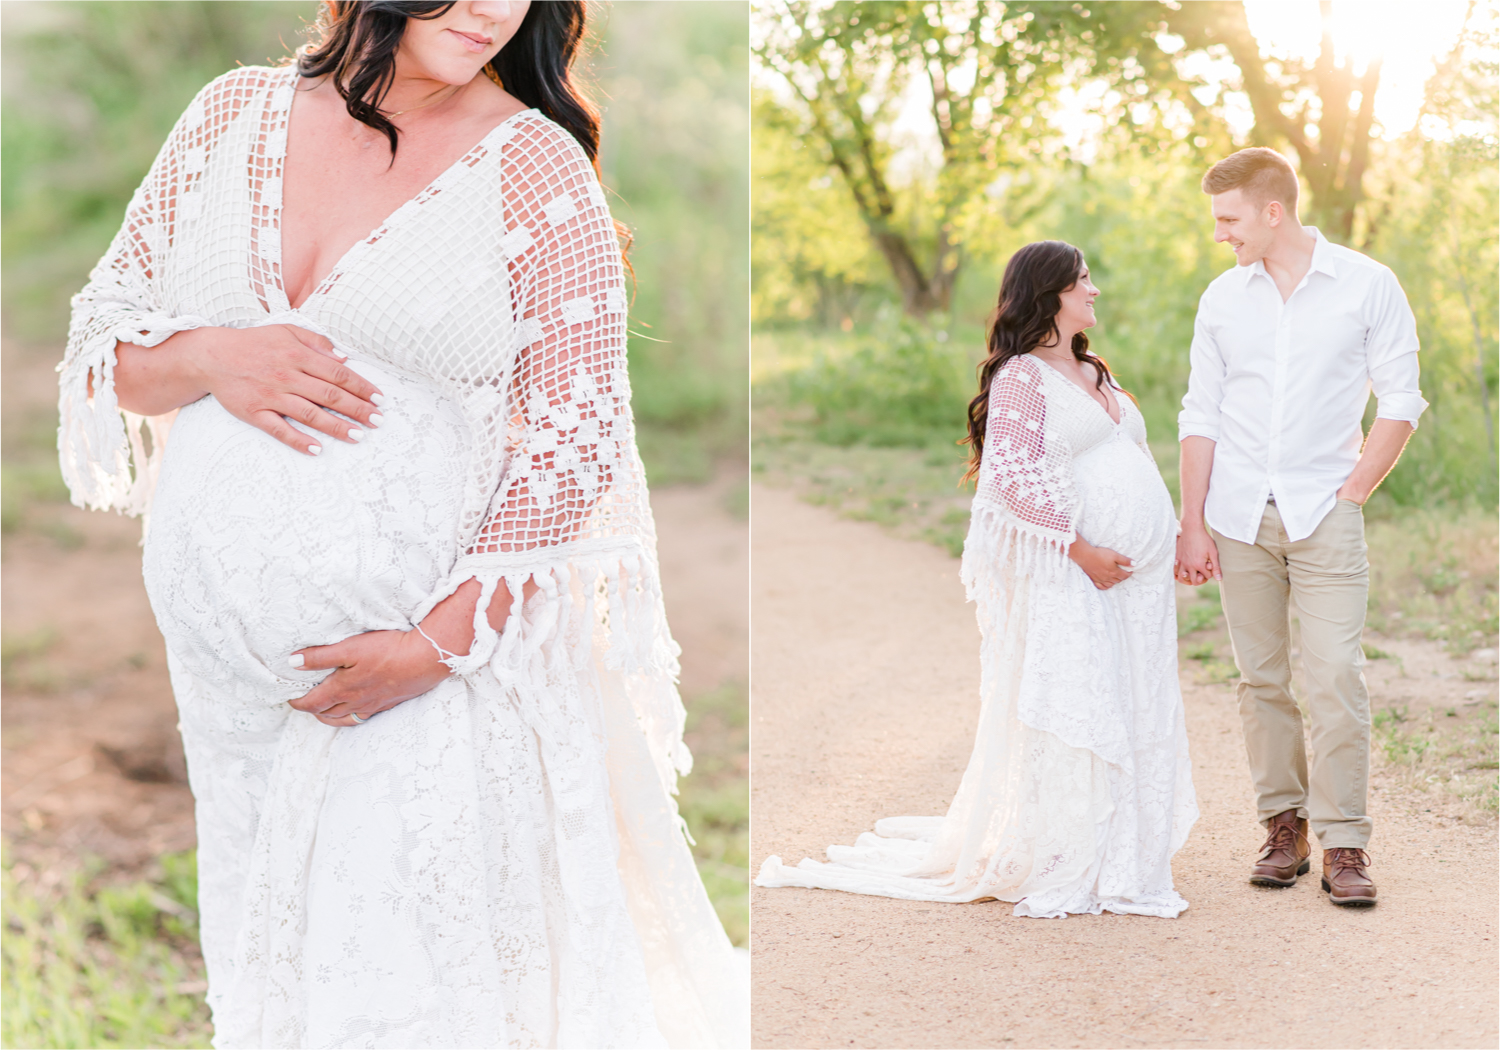 Spring Maternity Session in Loveland Colorado | Britni Girard Photography | Romantic Boho Inspired Maternity Session with Reclamation Dress at River's Edge | Colorado Wedding and Lifestyle Photographer